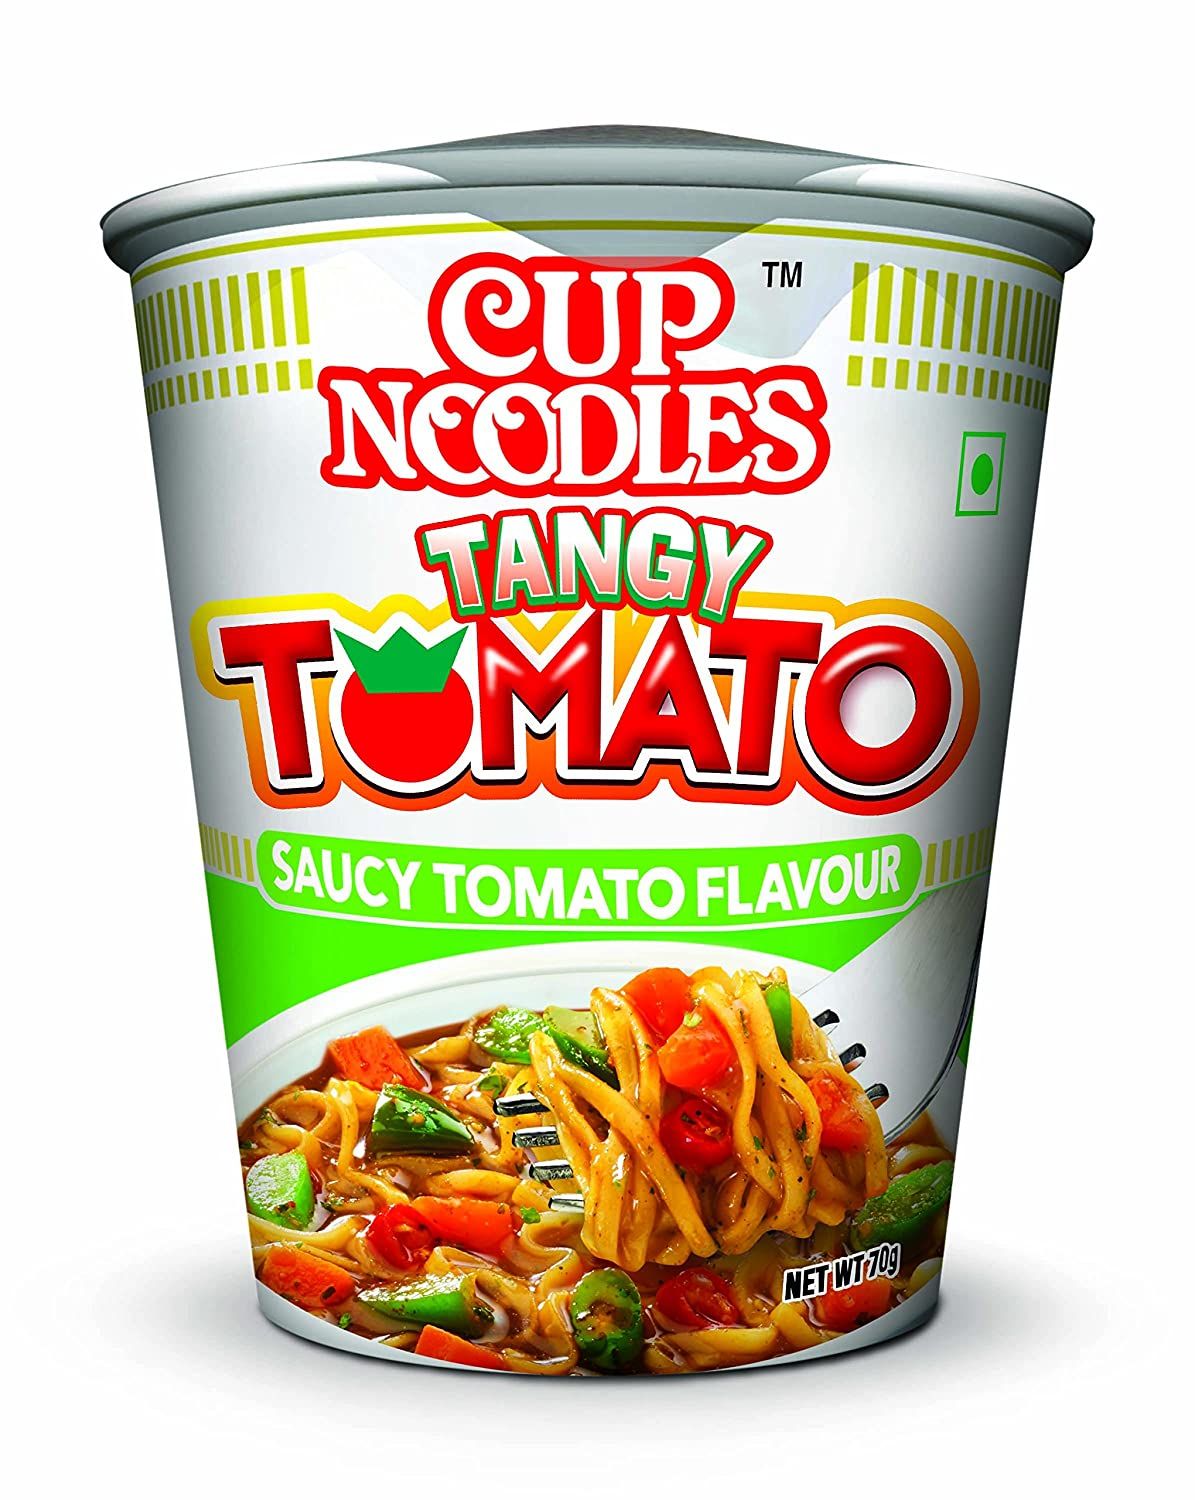 Cup Noodles Tangy Tomato Image